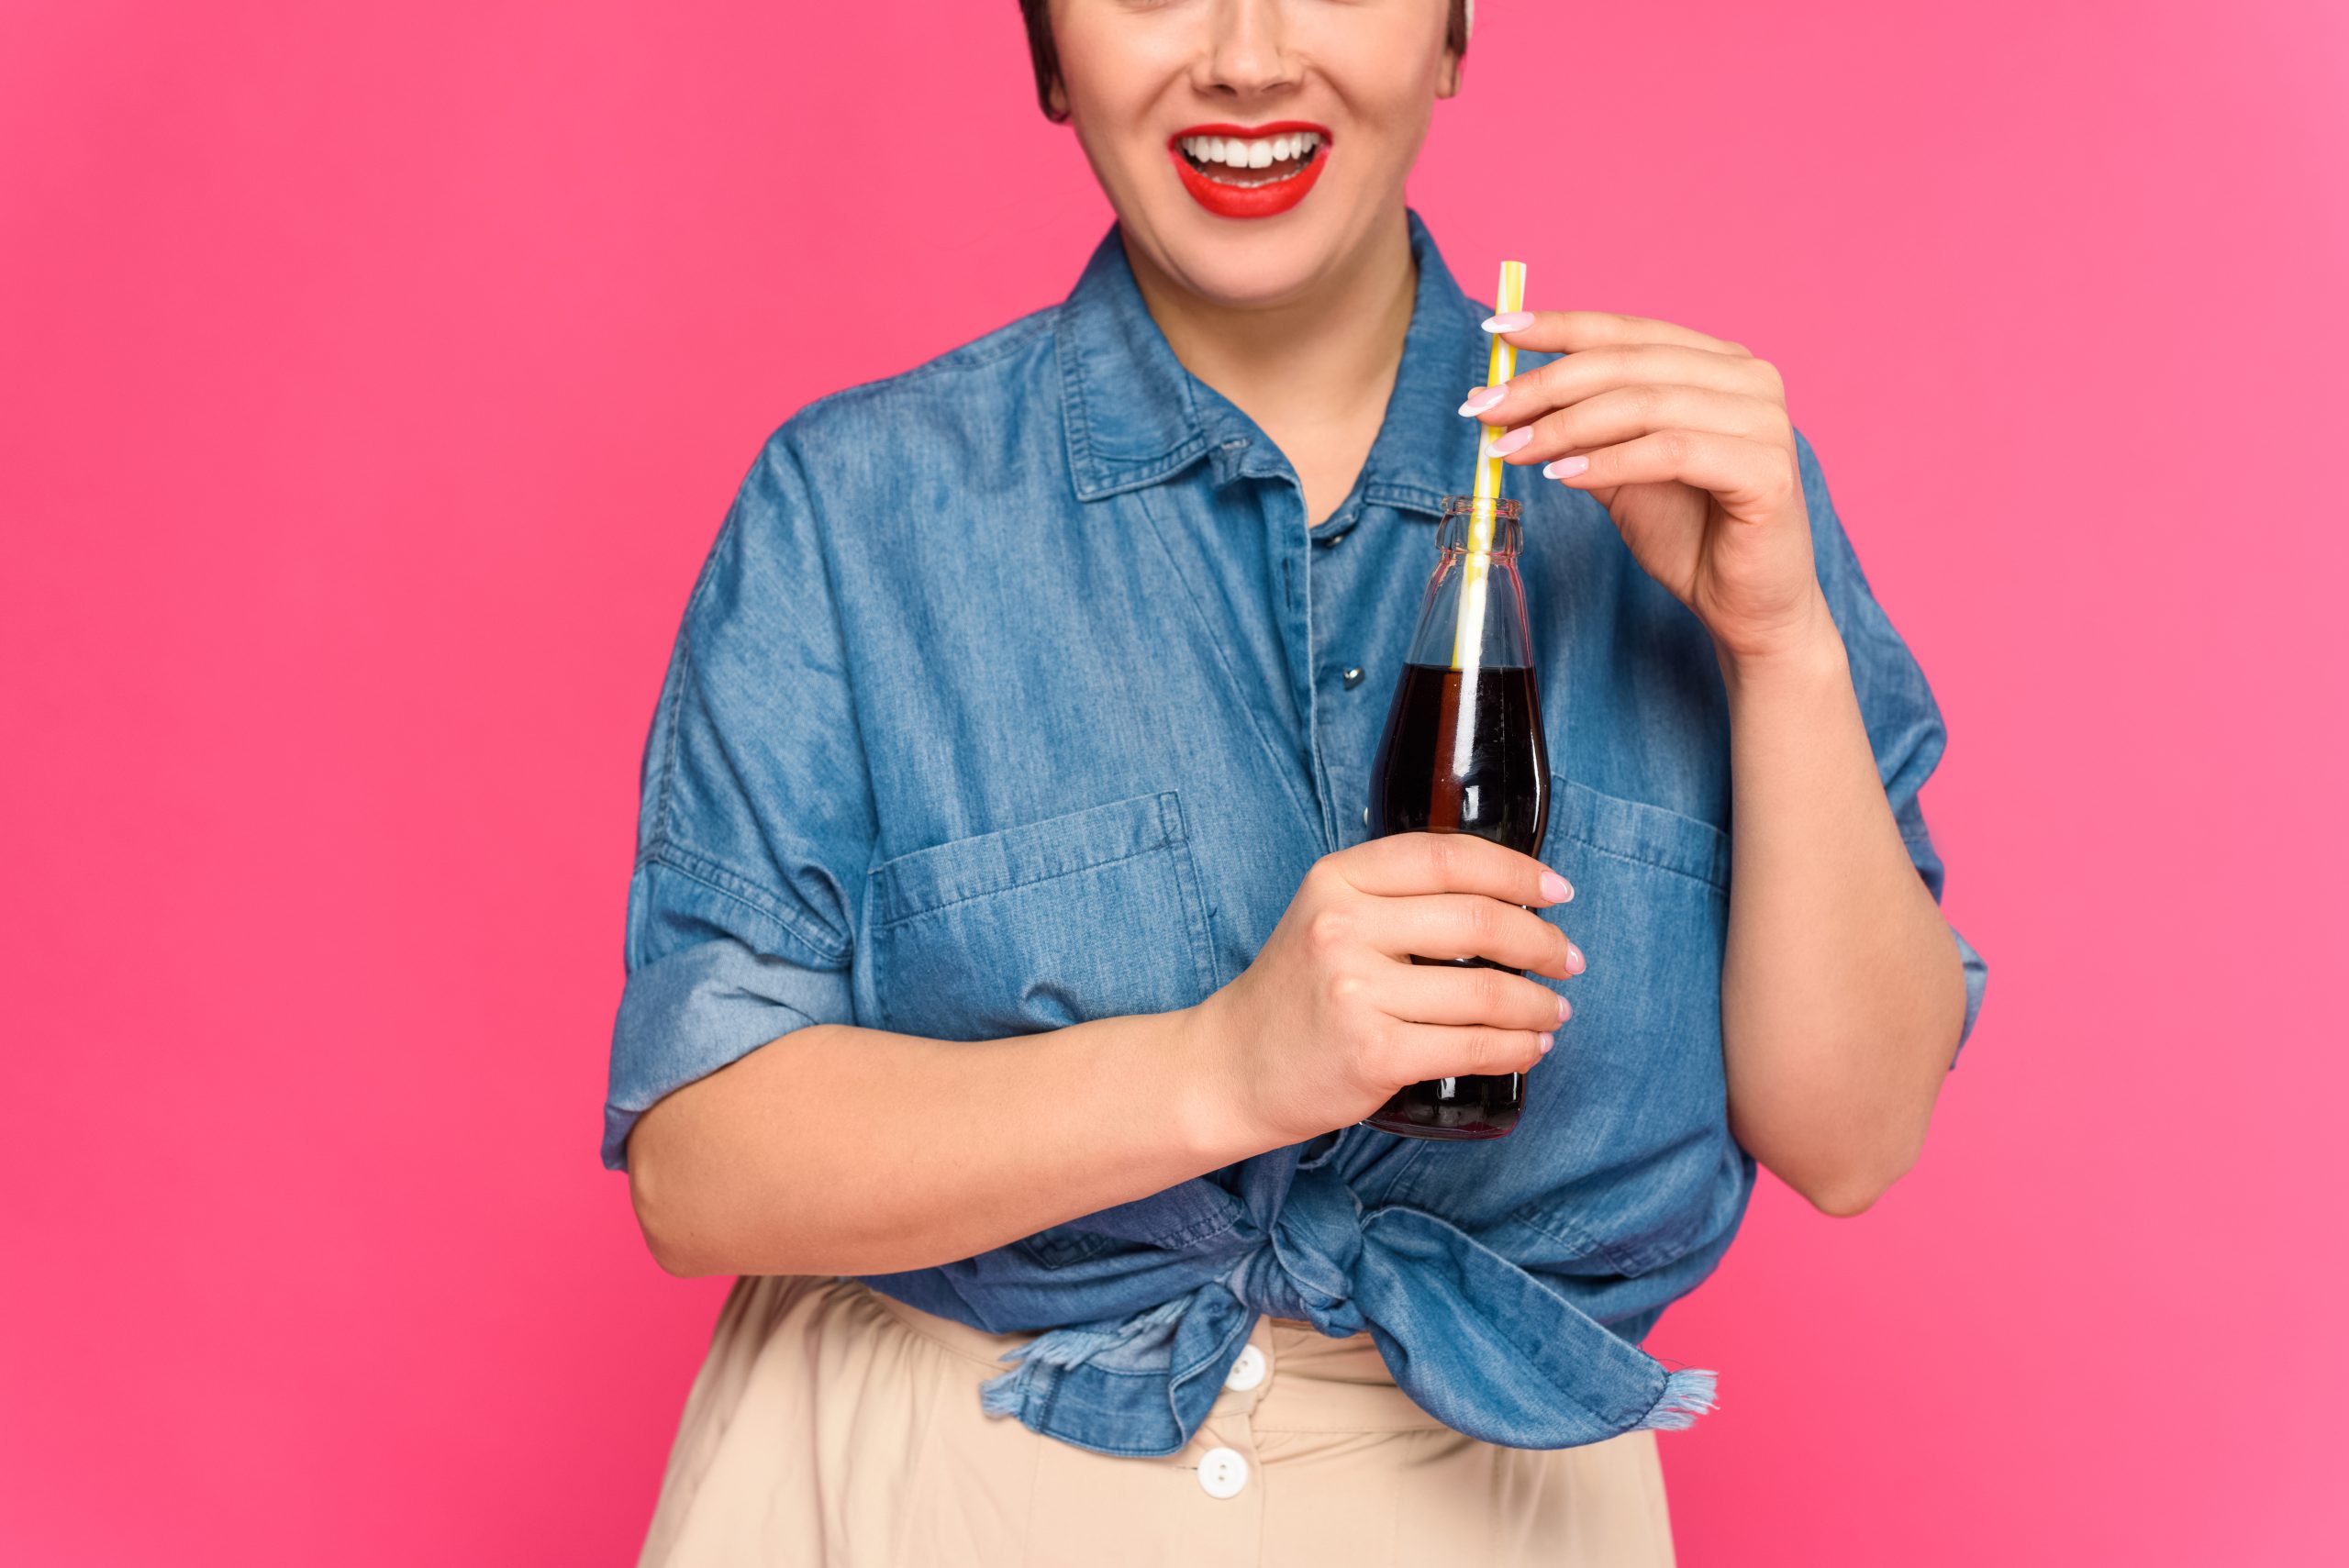 A cropped shot of a smiling woman holding a glass bottle of diet soda with a straw, illustrating the topic of **diet soda on keto**. The vibrant pink background and casual denim outfit emphasize the relaxed and enjoyable aspect of incorporating diet soda into a keto diet.